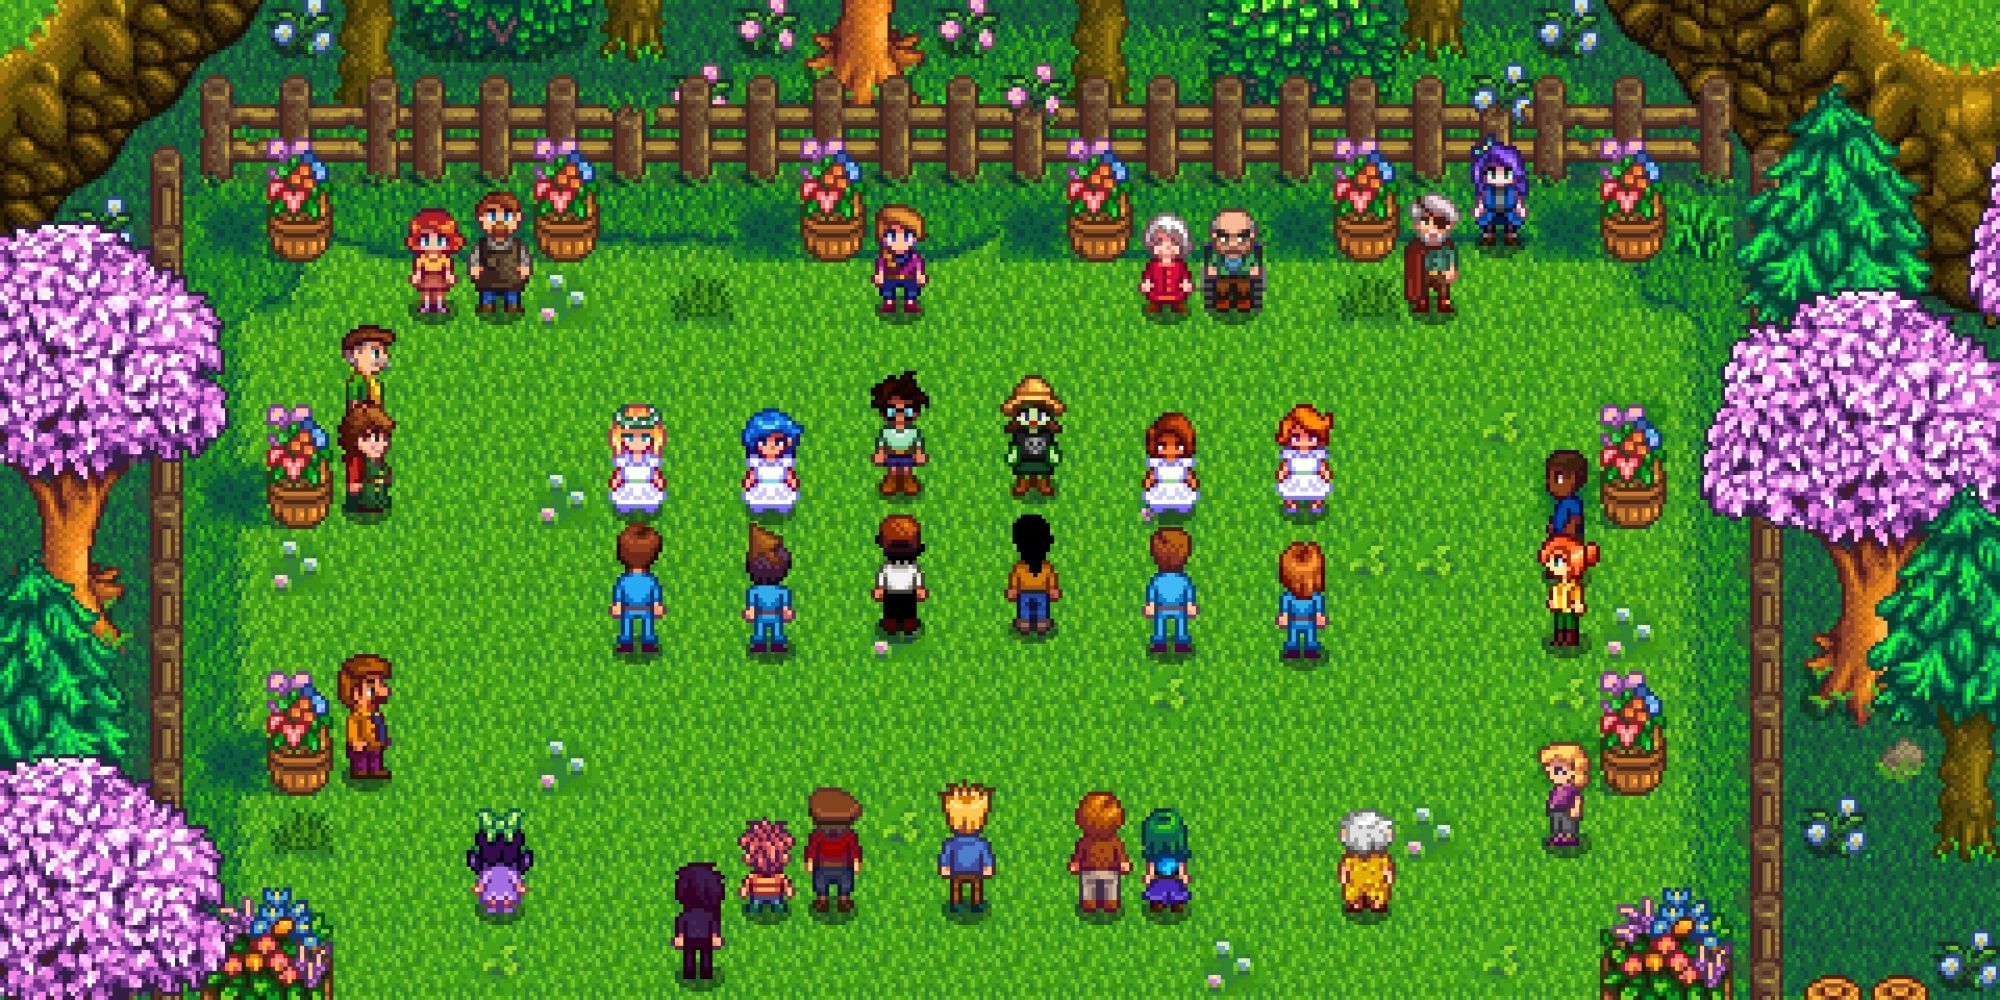 players attend the Flower Dance with other Pelican Town residents